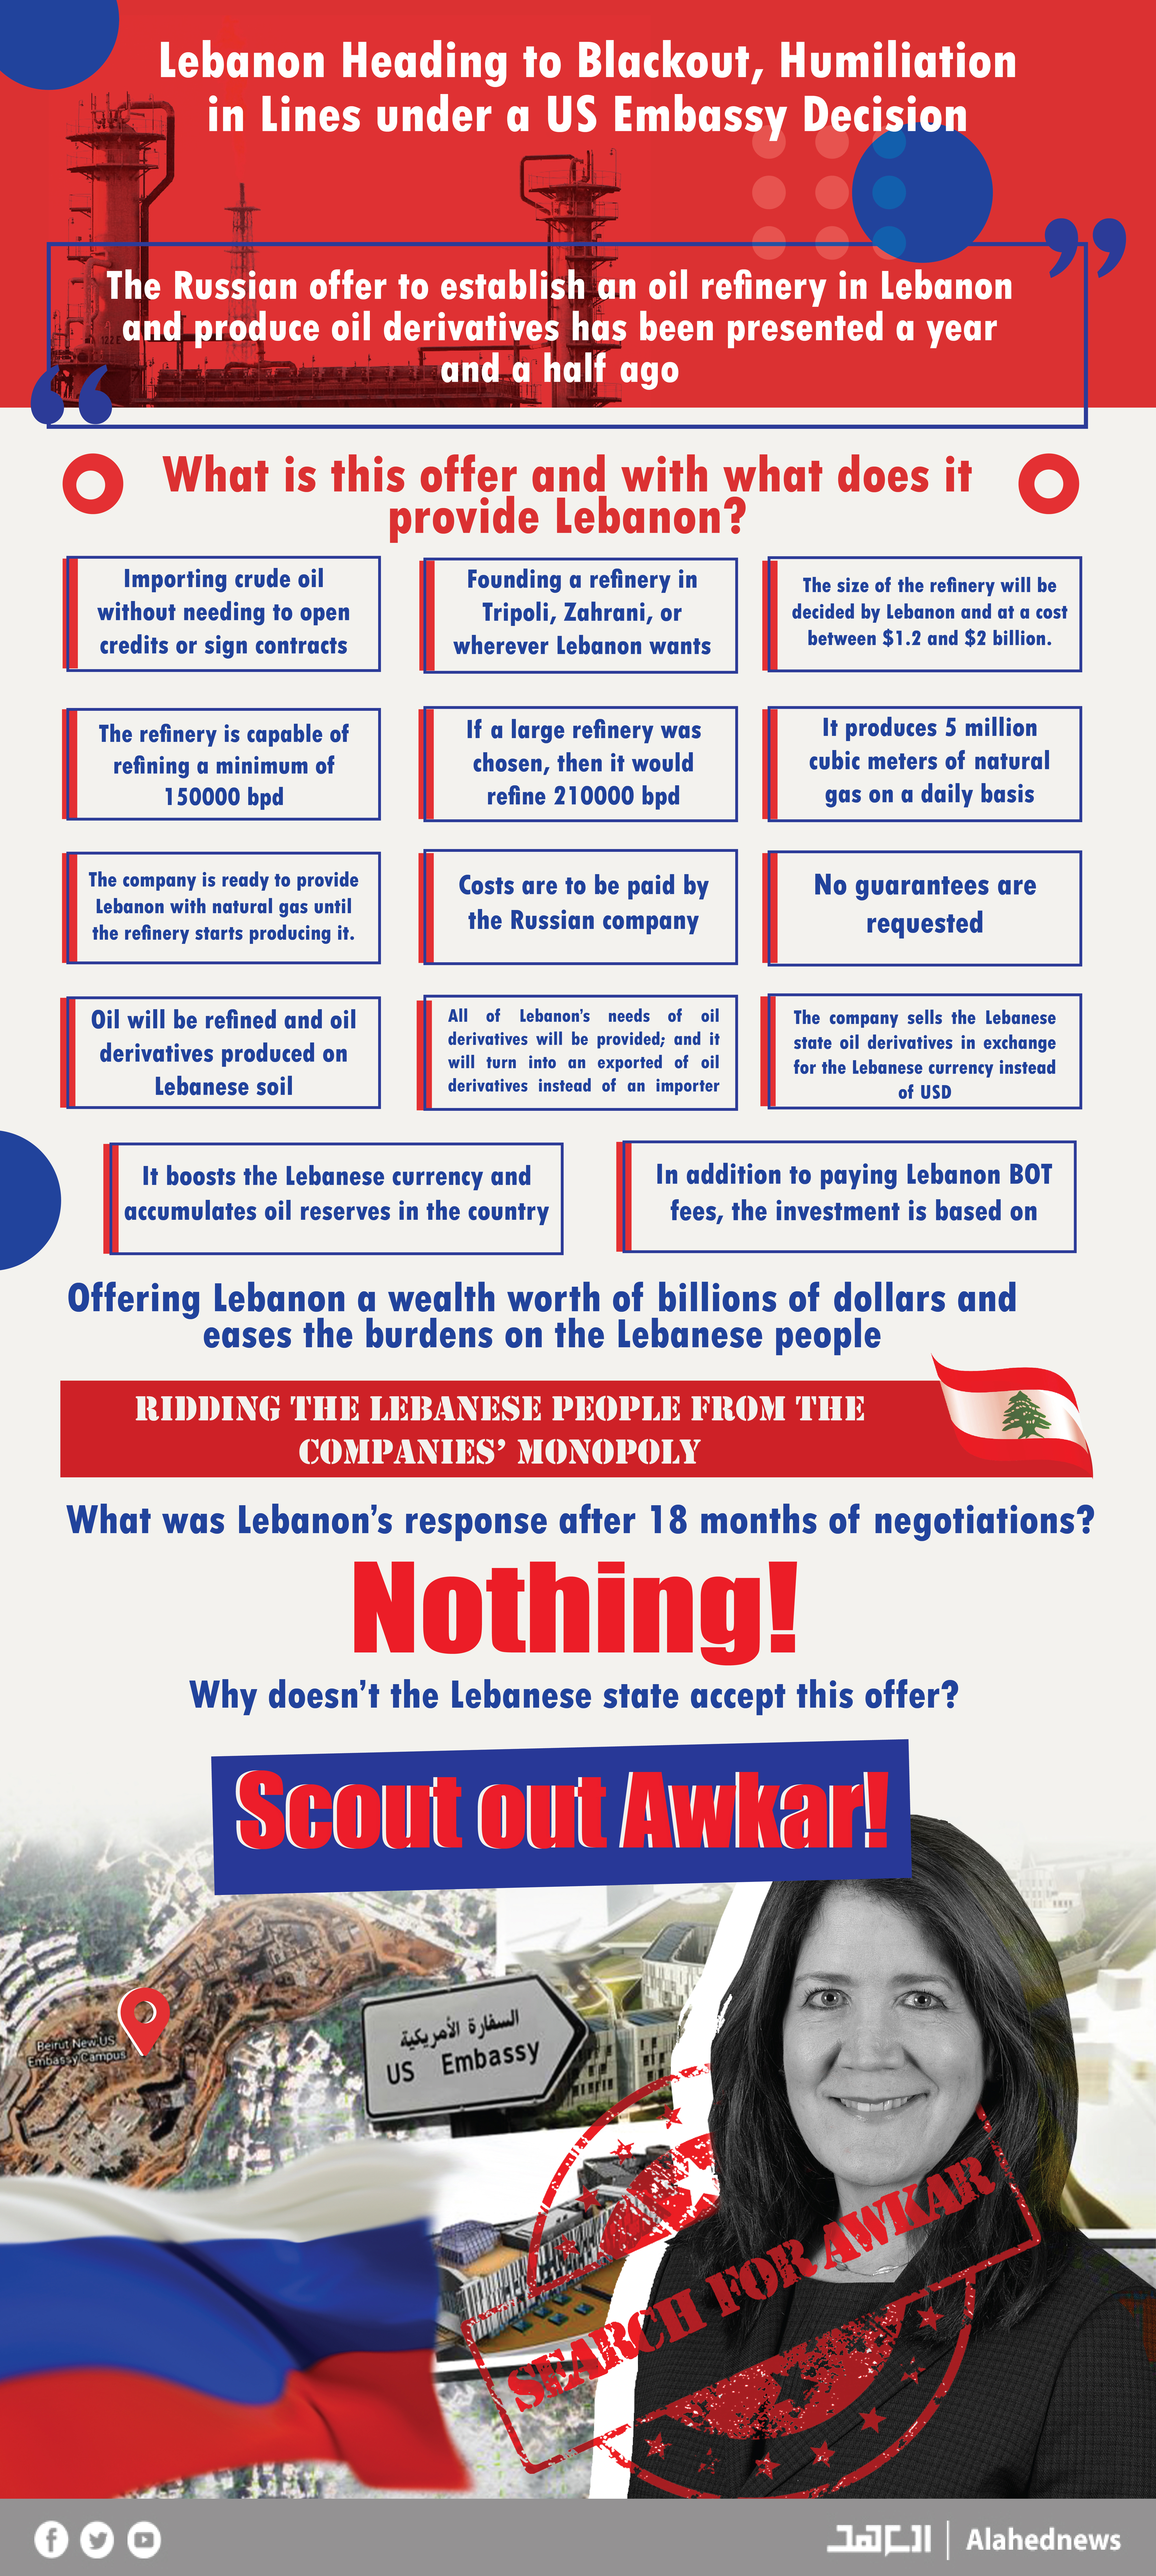 Lebanon Heading to Blackout, Humiliation in Lines under a US Embassy Decision - Info-graphics